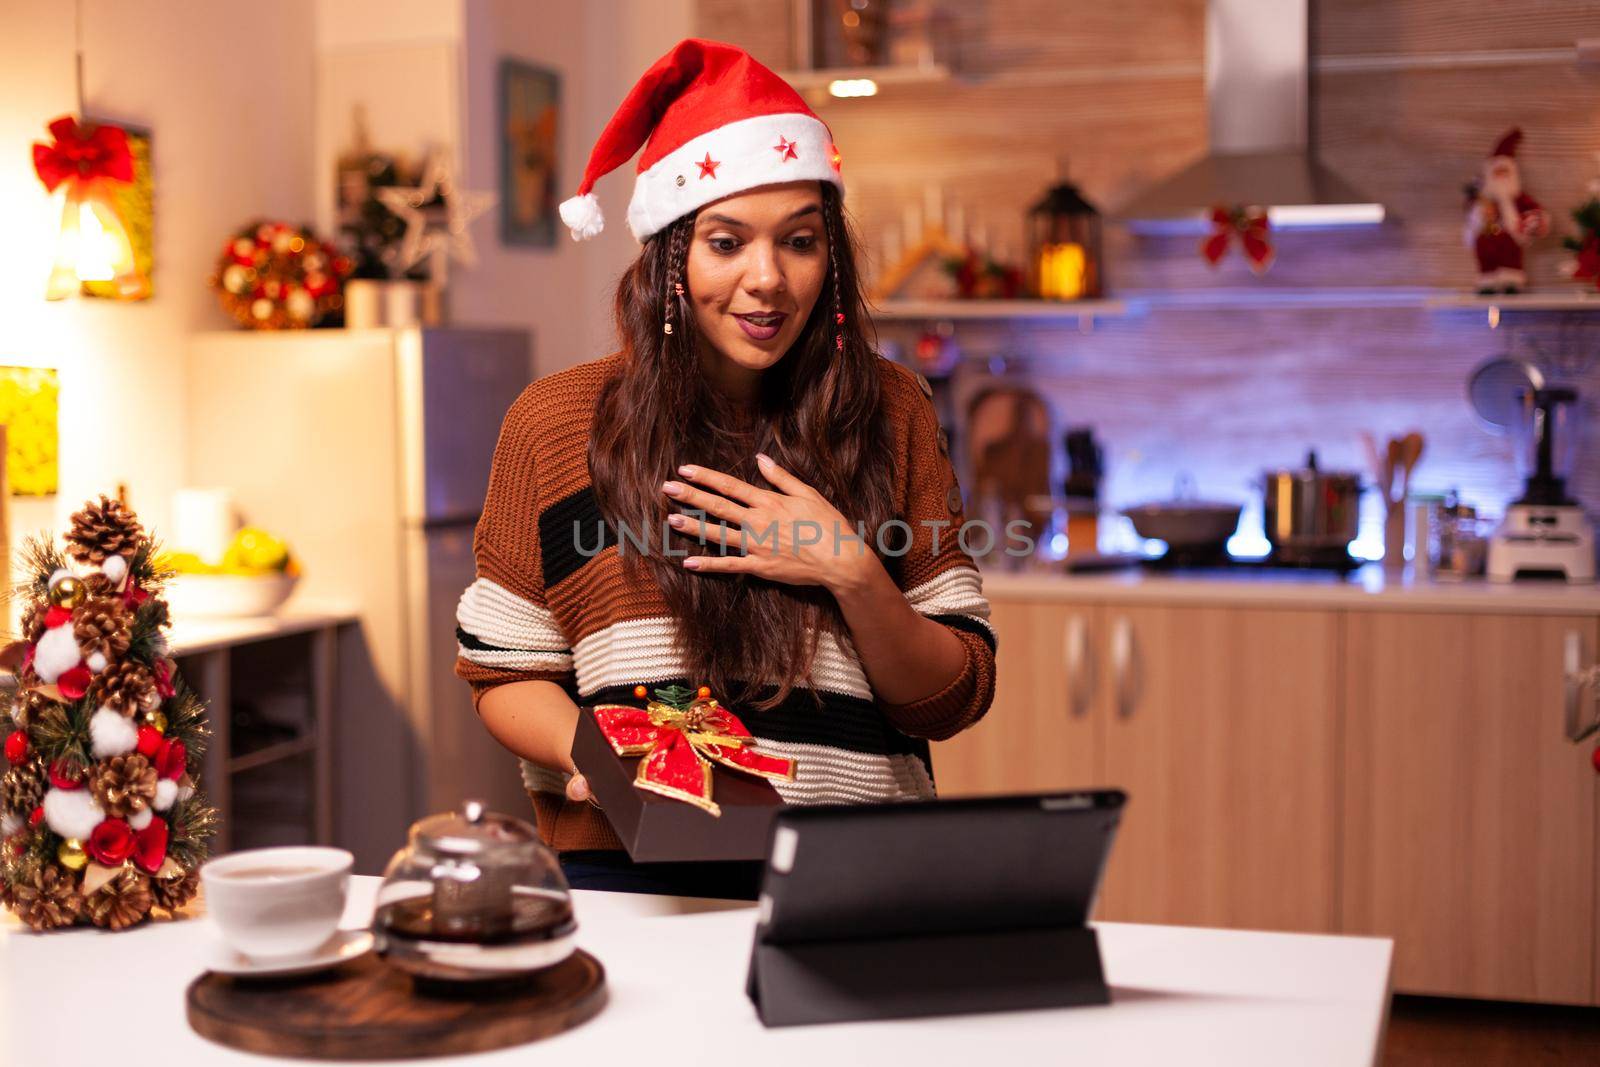 Happy woman using video call conference app on tablet giving virtual christmas present in festive home. Caucasian young person showing winter gifts with friends preparing for reunion